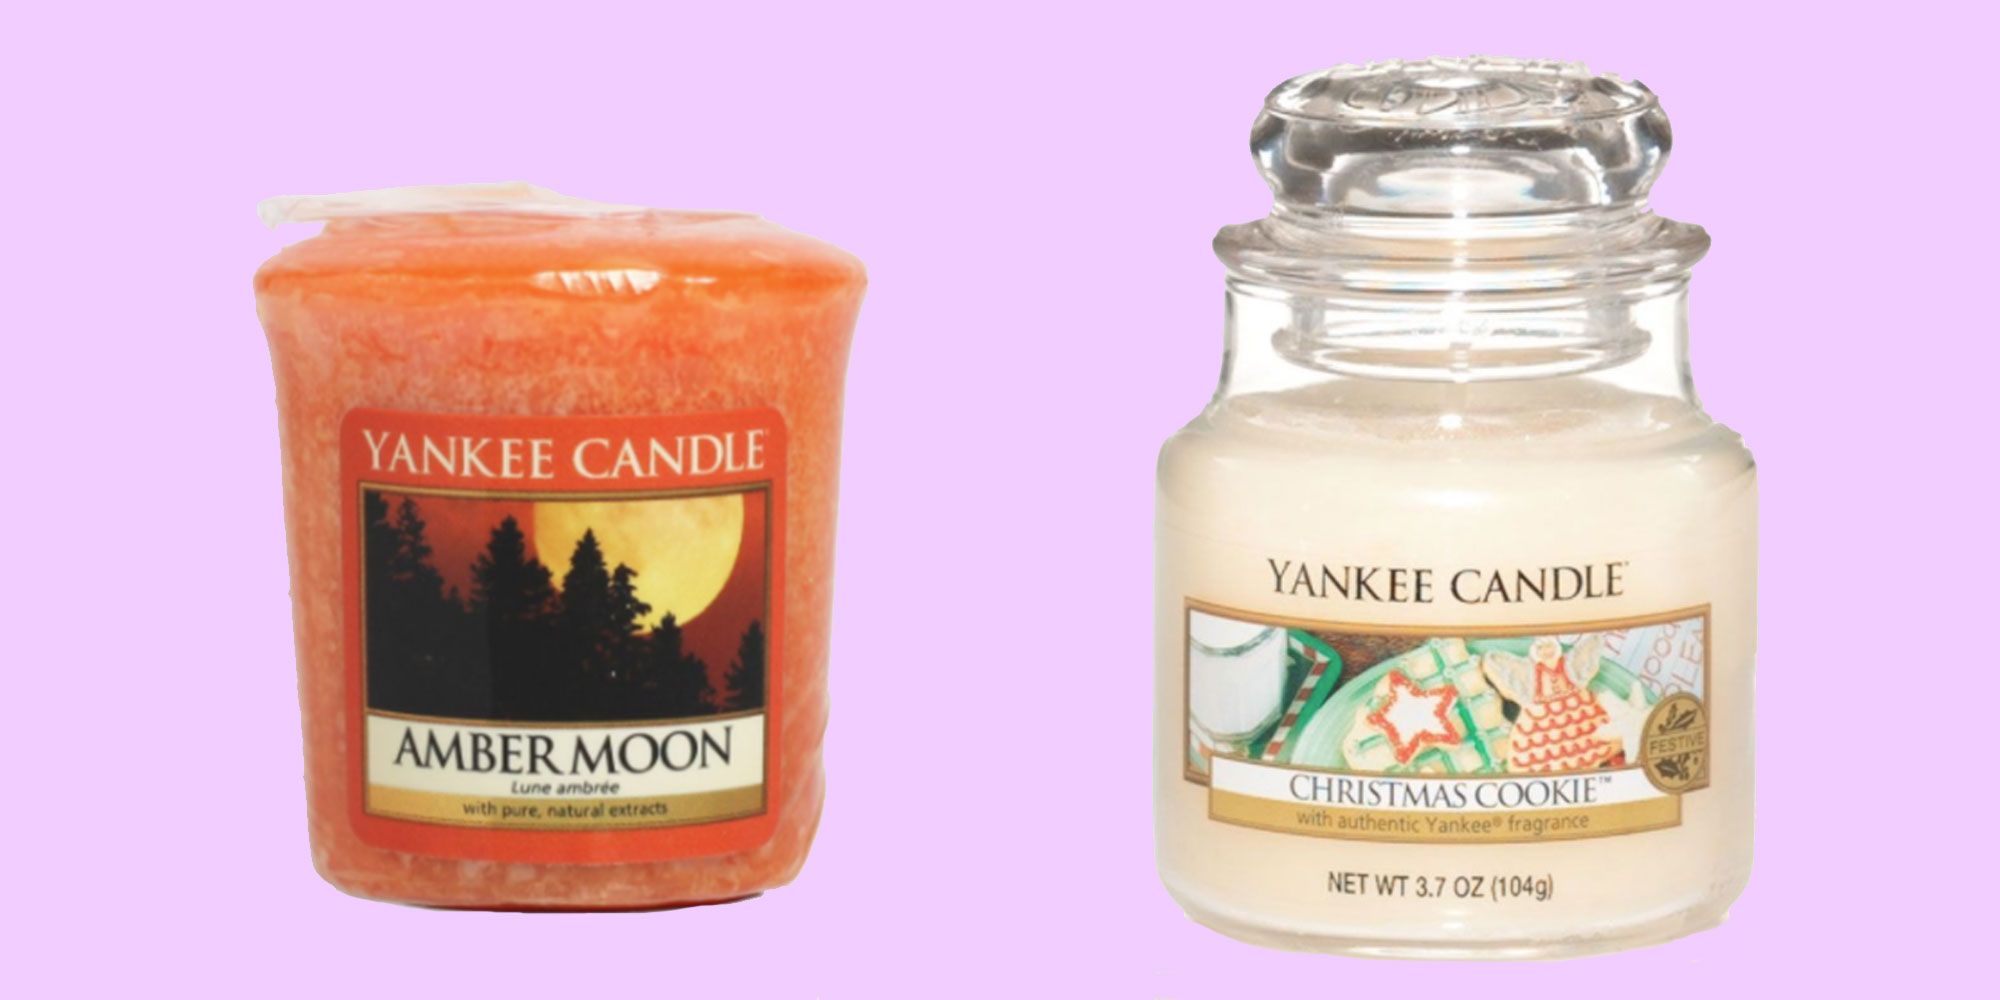 We all need passion fruit martini Yankee Candles in our lives